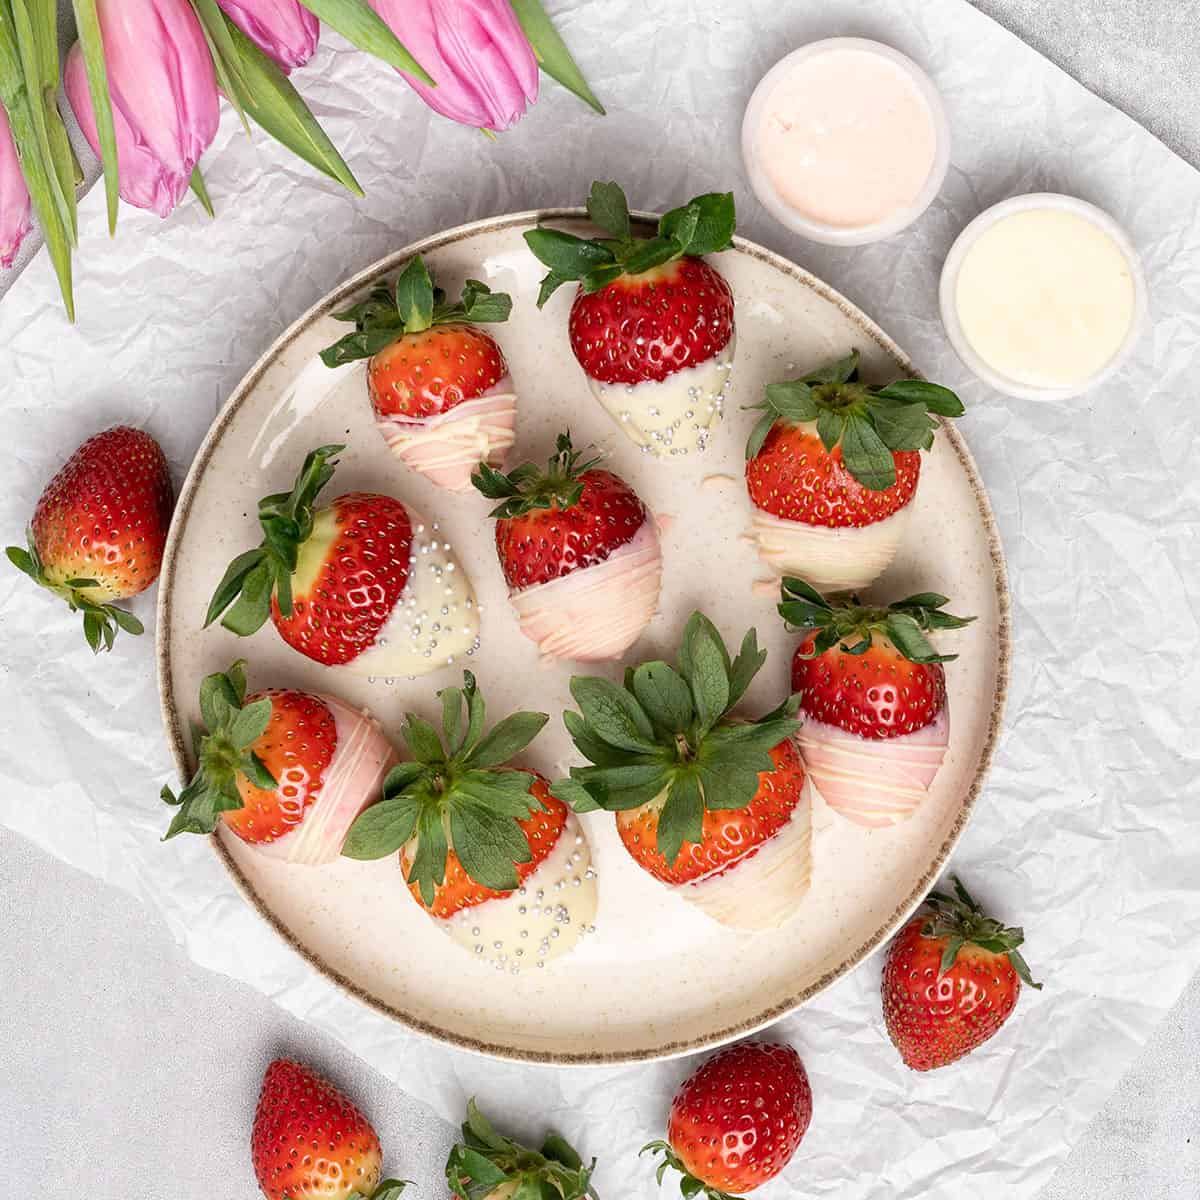 white chocolate covered strawberries on a plate.